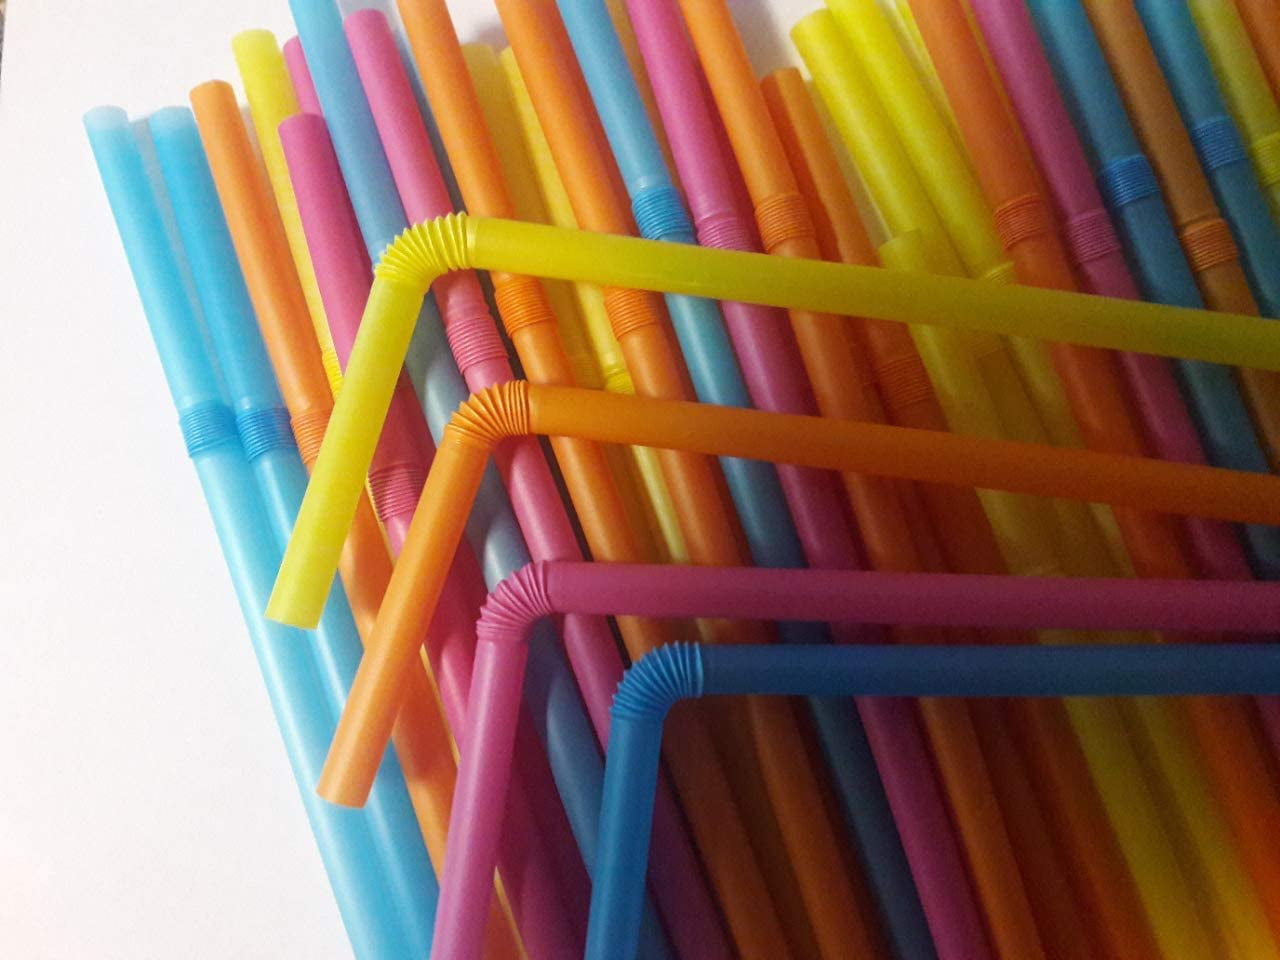 Kaboer 100 Colourful Plastic Straws, Reusable Plastic Straws, Flexible Bendy Fancy Straws for Drinking, 12.8 Inches